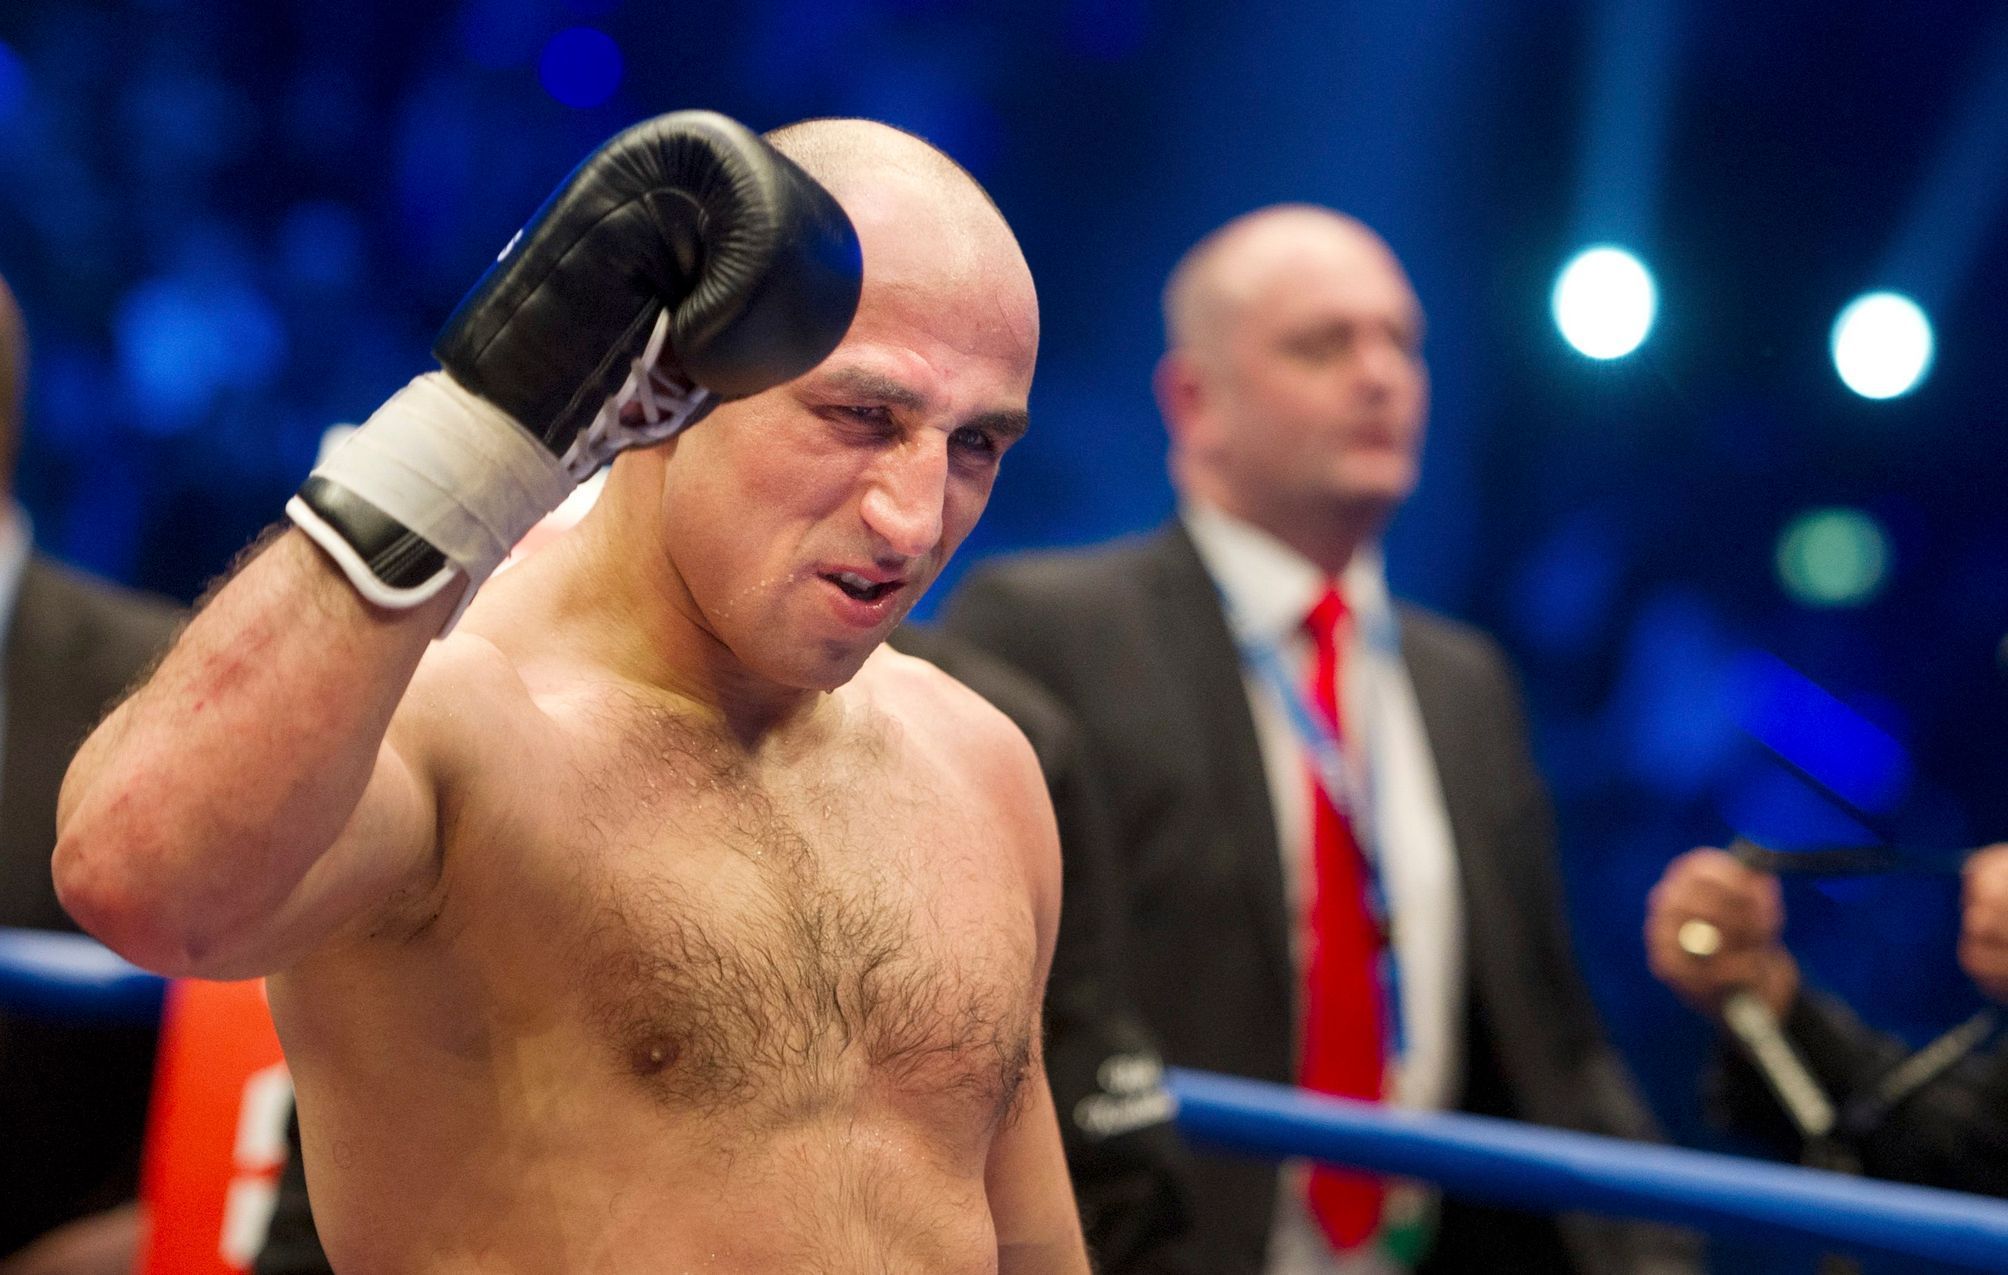 German WBO super-middleweight boxer, Arthur Abraham, reacts after winning the title fight against his challenger, Britain's Paul Smith, in Berlin